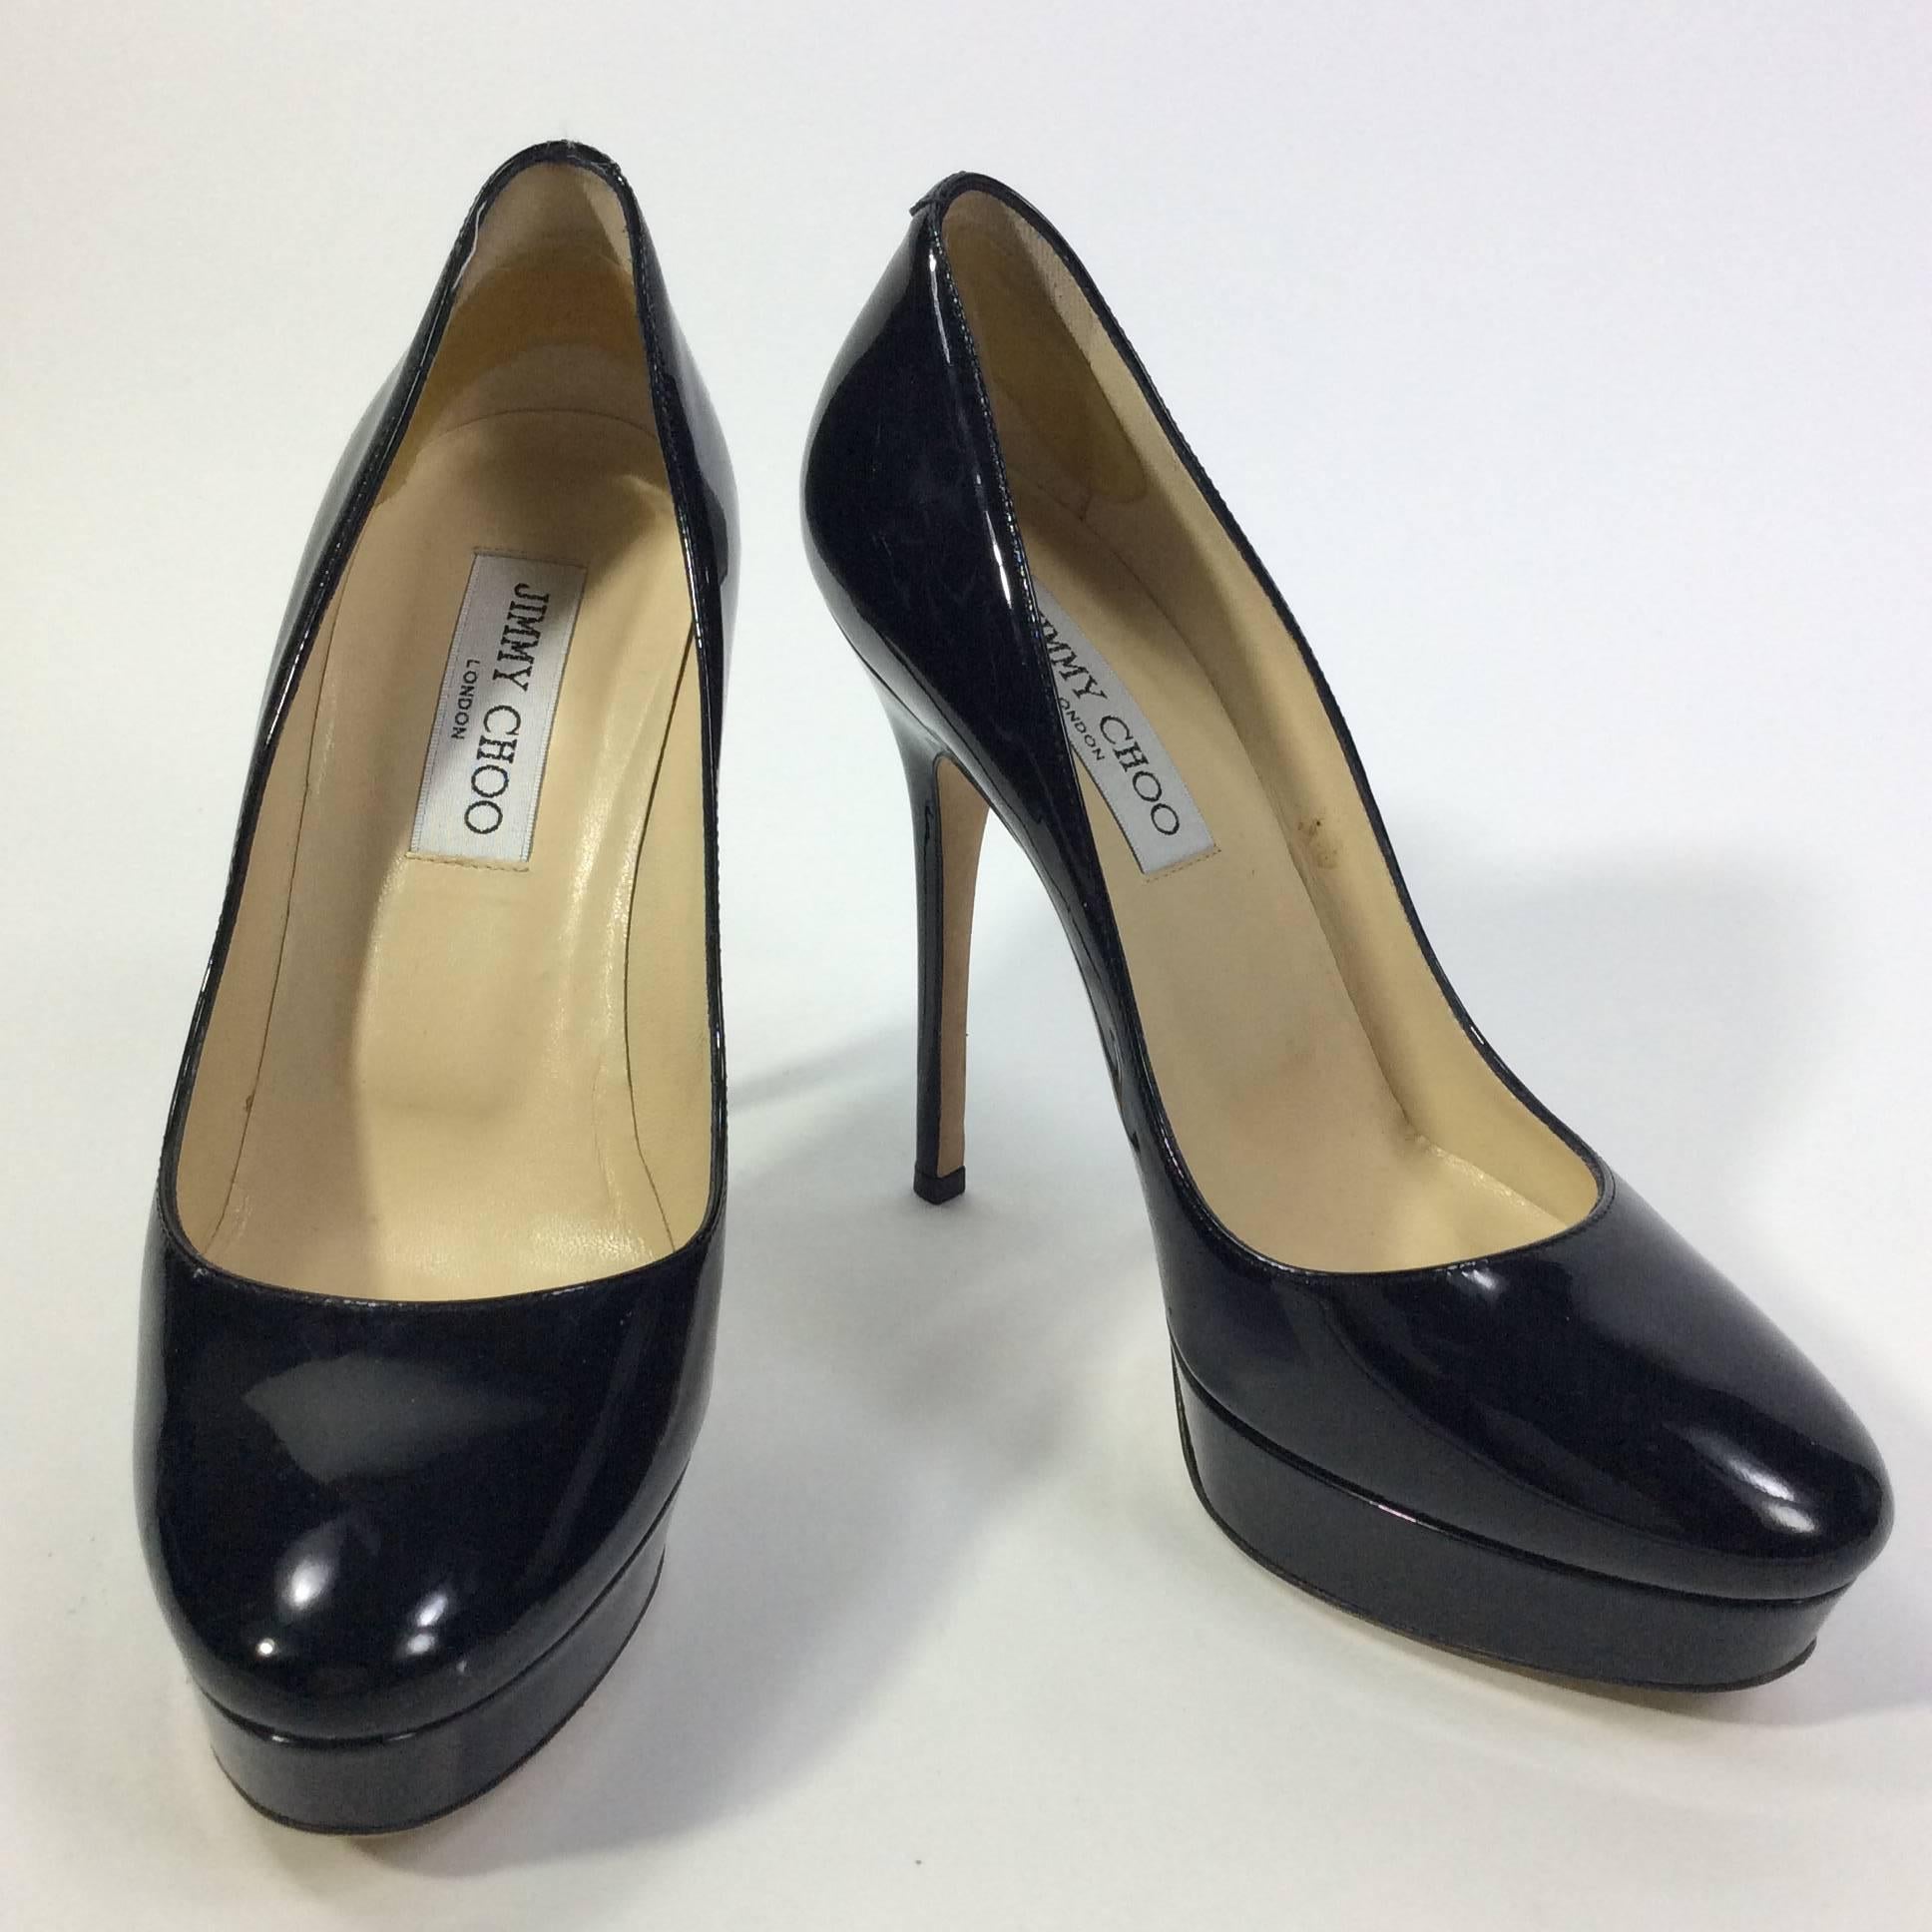 Jimmy Choo Black Patent Pump with Rounded Toe In Fair Condition For Sale In Narberth, PA